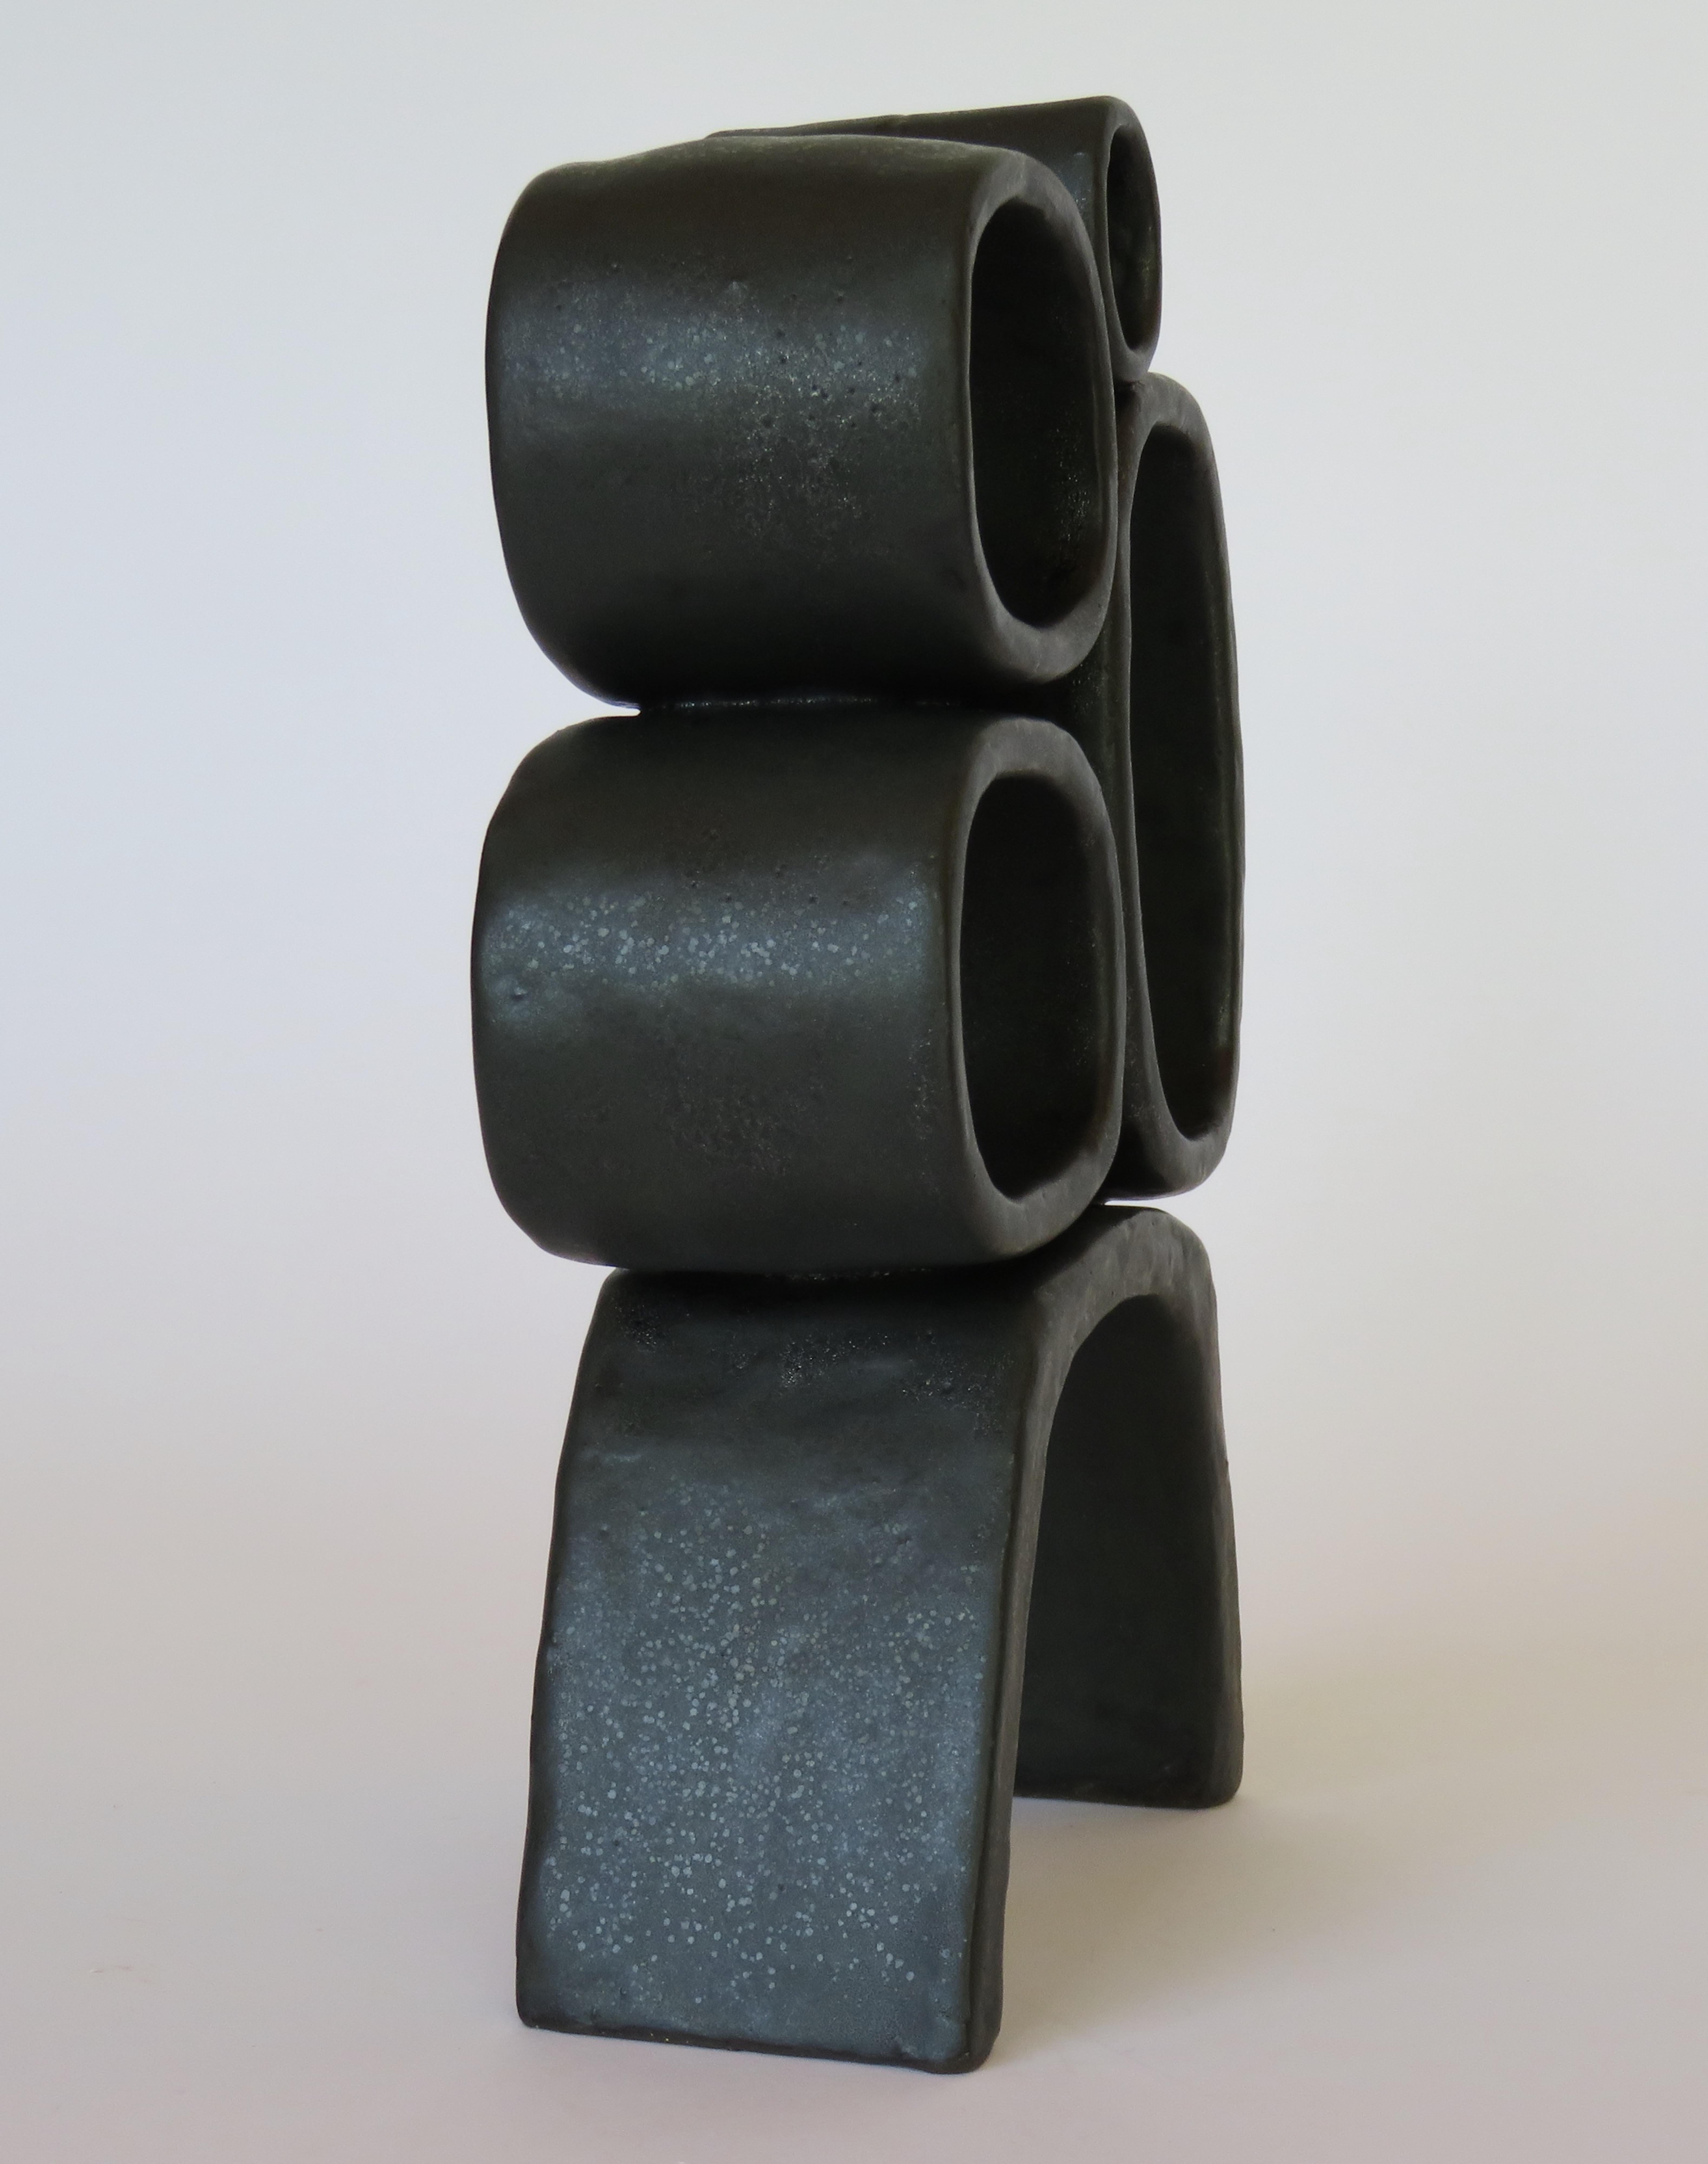 American Metallic Black Hand-Built Ceramic Sculpture with Hollow Rings on Angled Legs